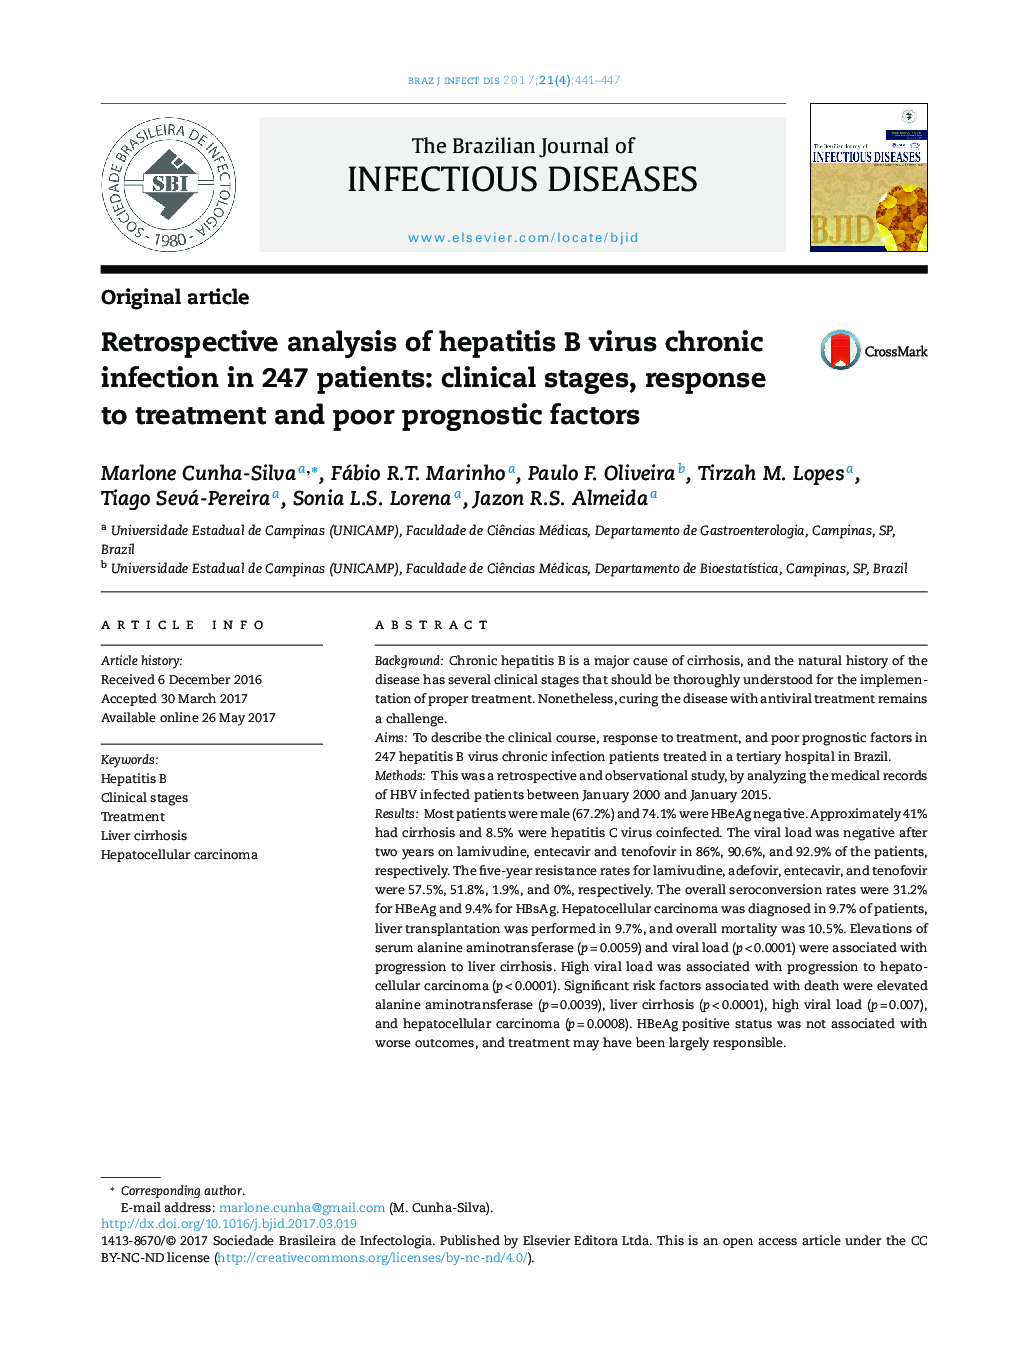 Retrospective analysis of hepatitis B virus chronic infection in 247 patients: clinical stages, response to treatment and poor prognostic factors